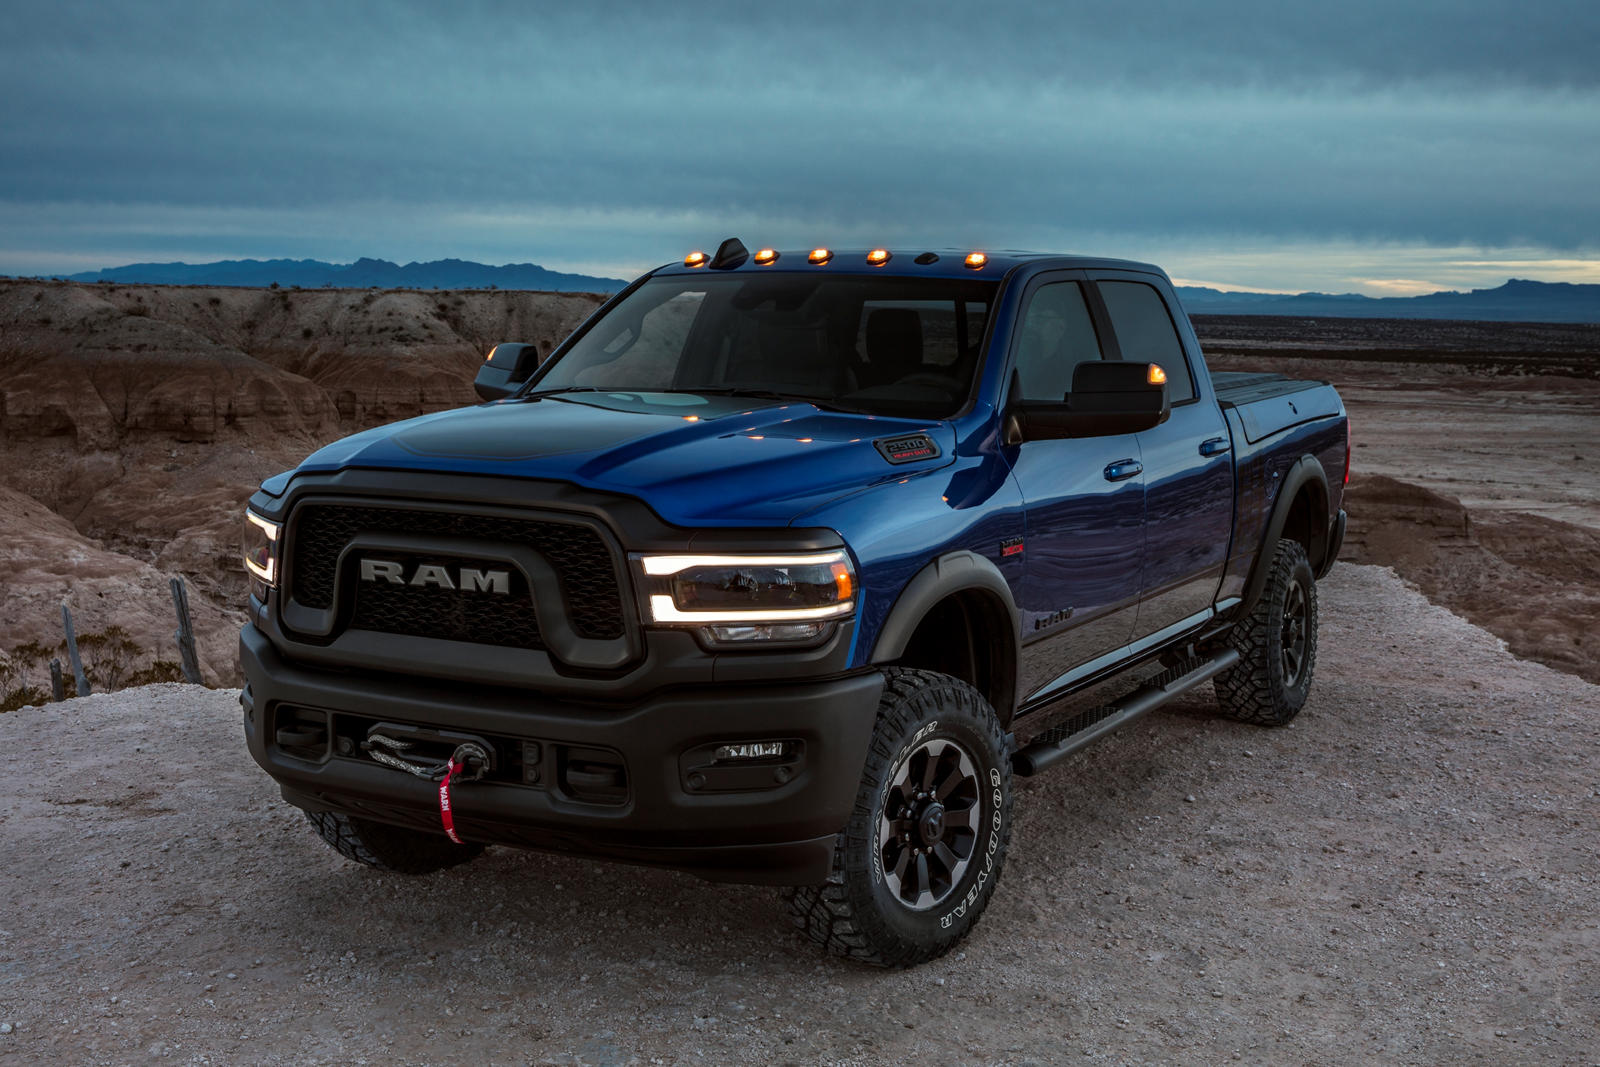 2021 Ram Heavy Duty Trucks Arrive With New Limited Night Edition | CarBuzz